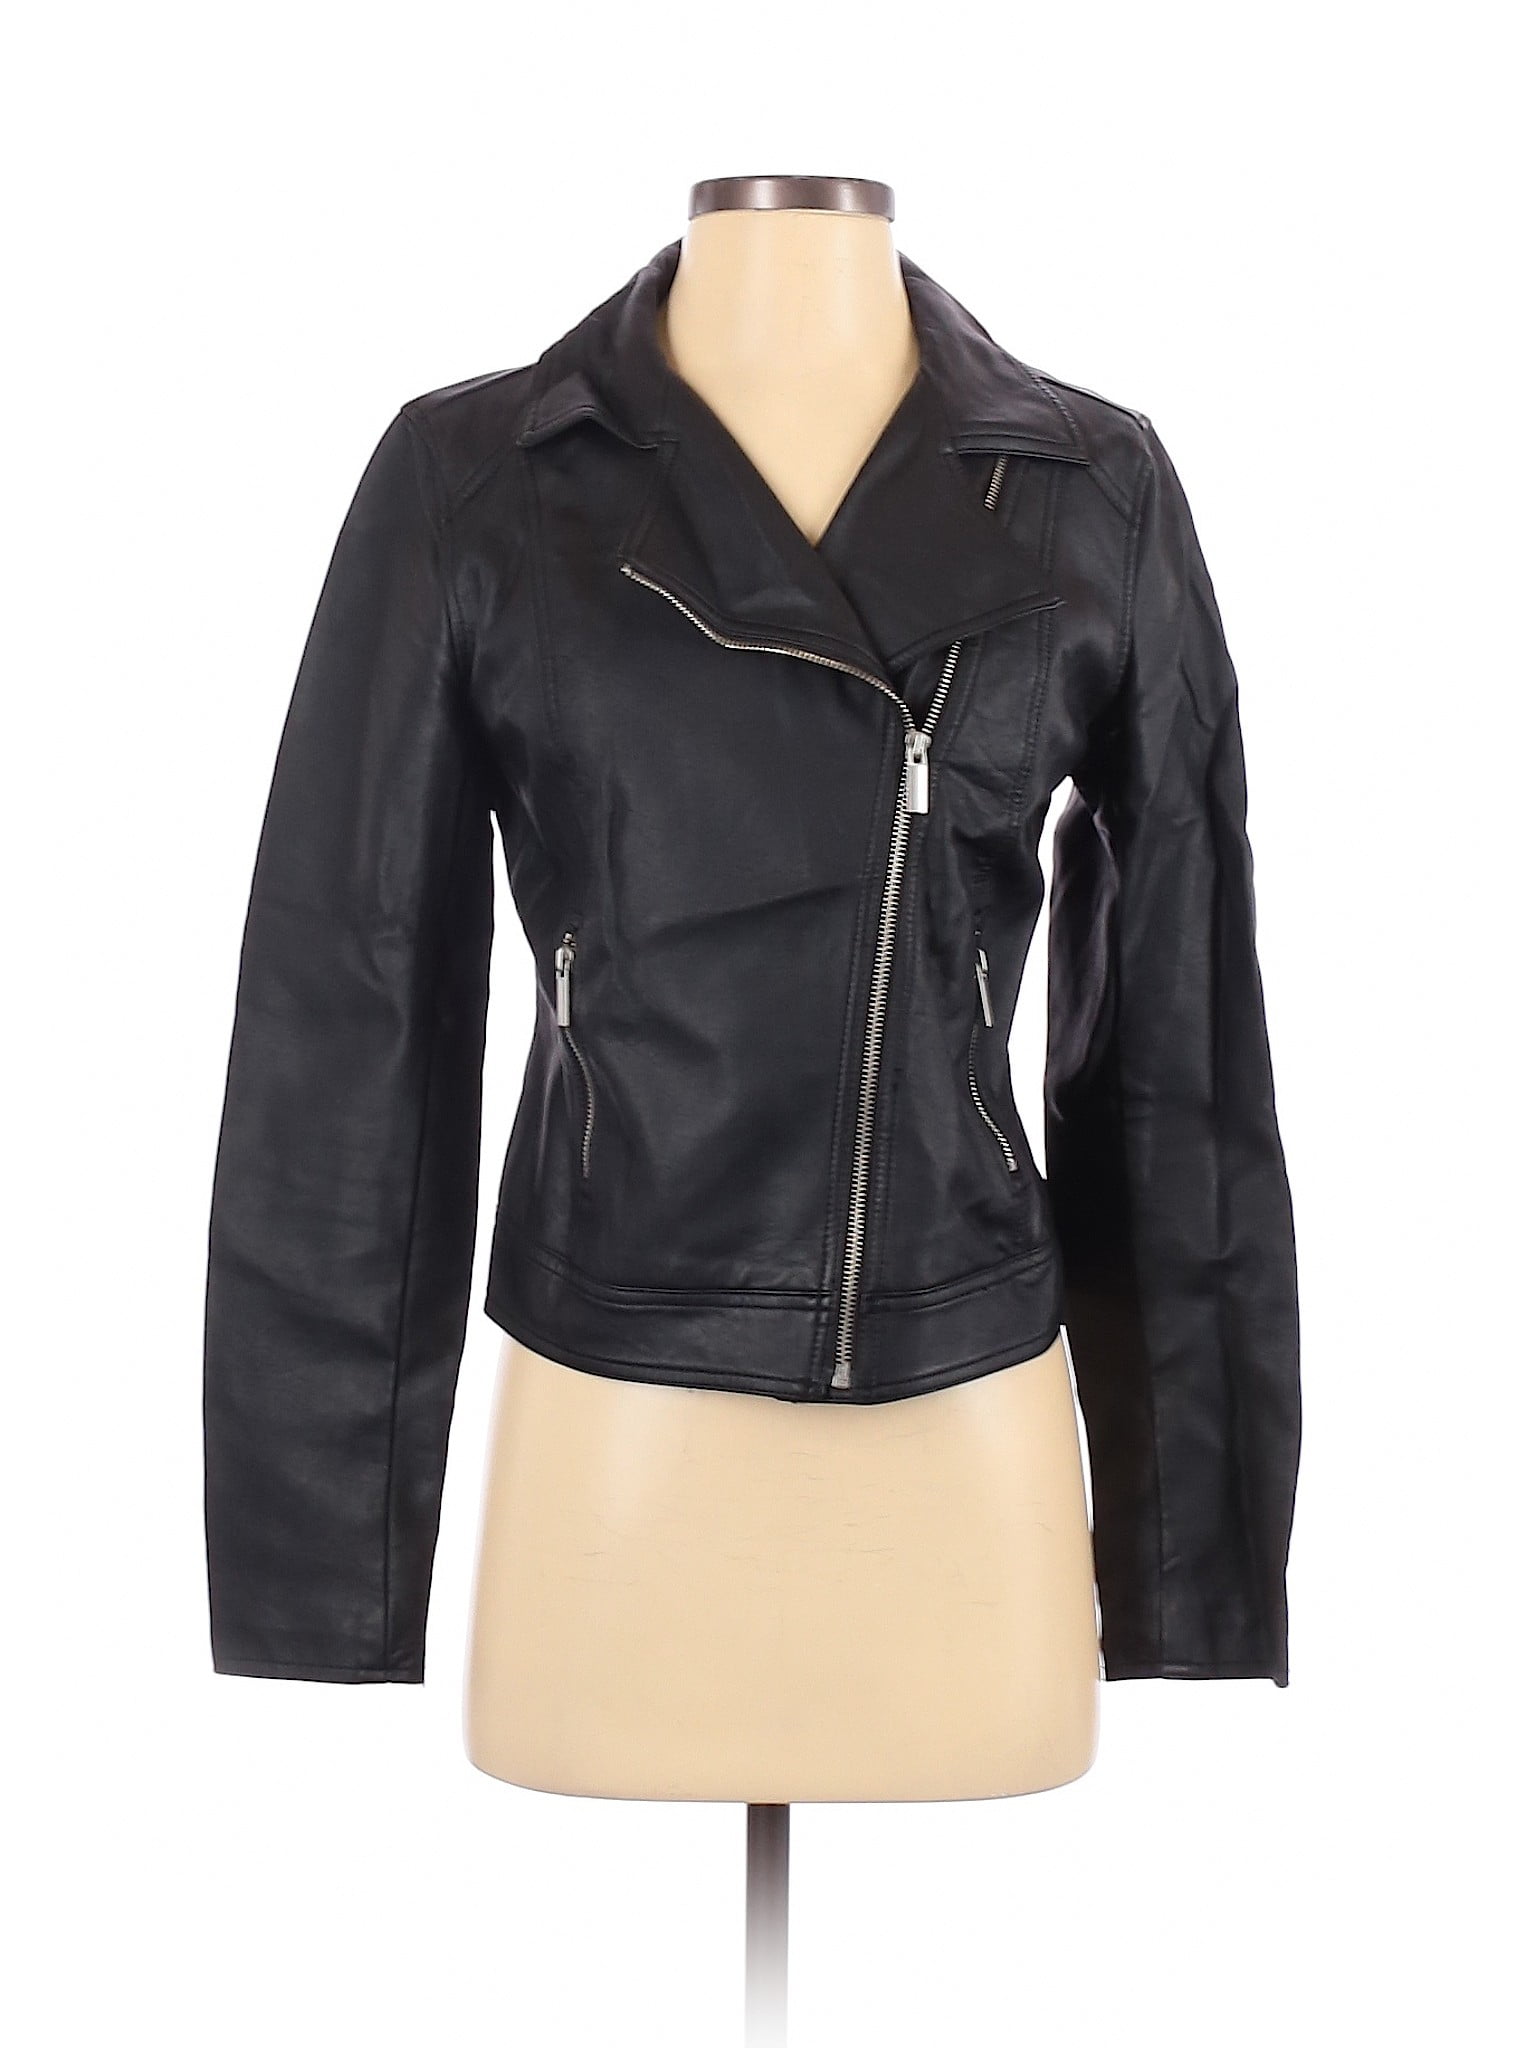 Old Navy - Pre-Owned Old Navy Women's Size S Petite Faux Leather Jacket ...